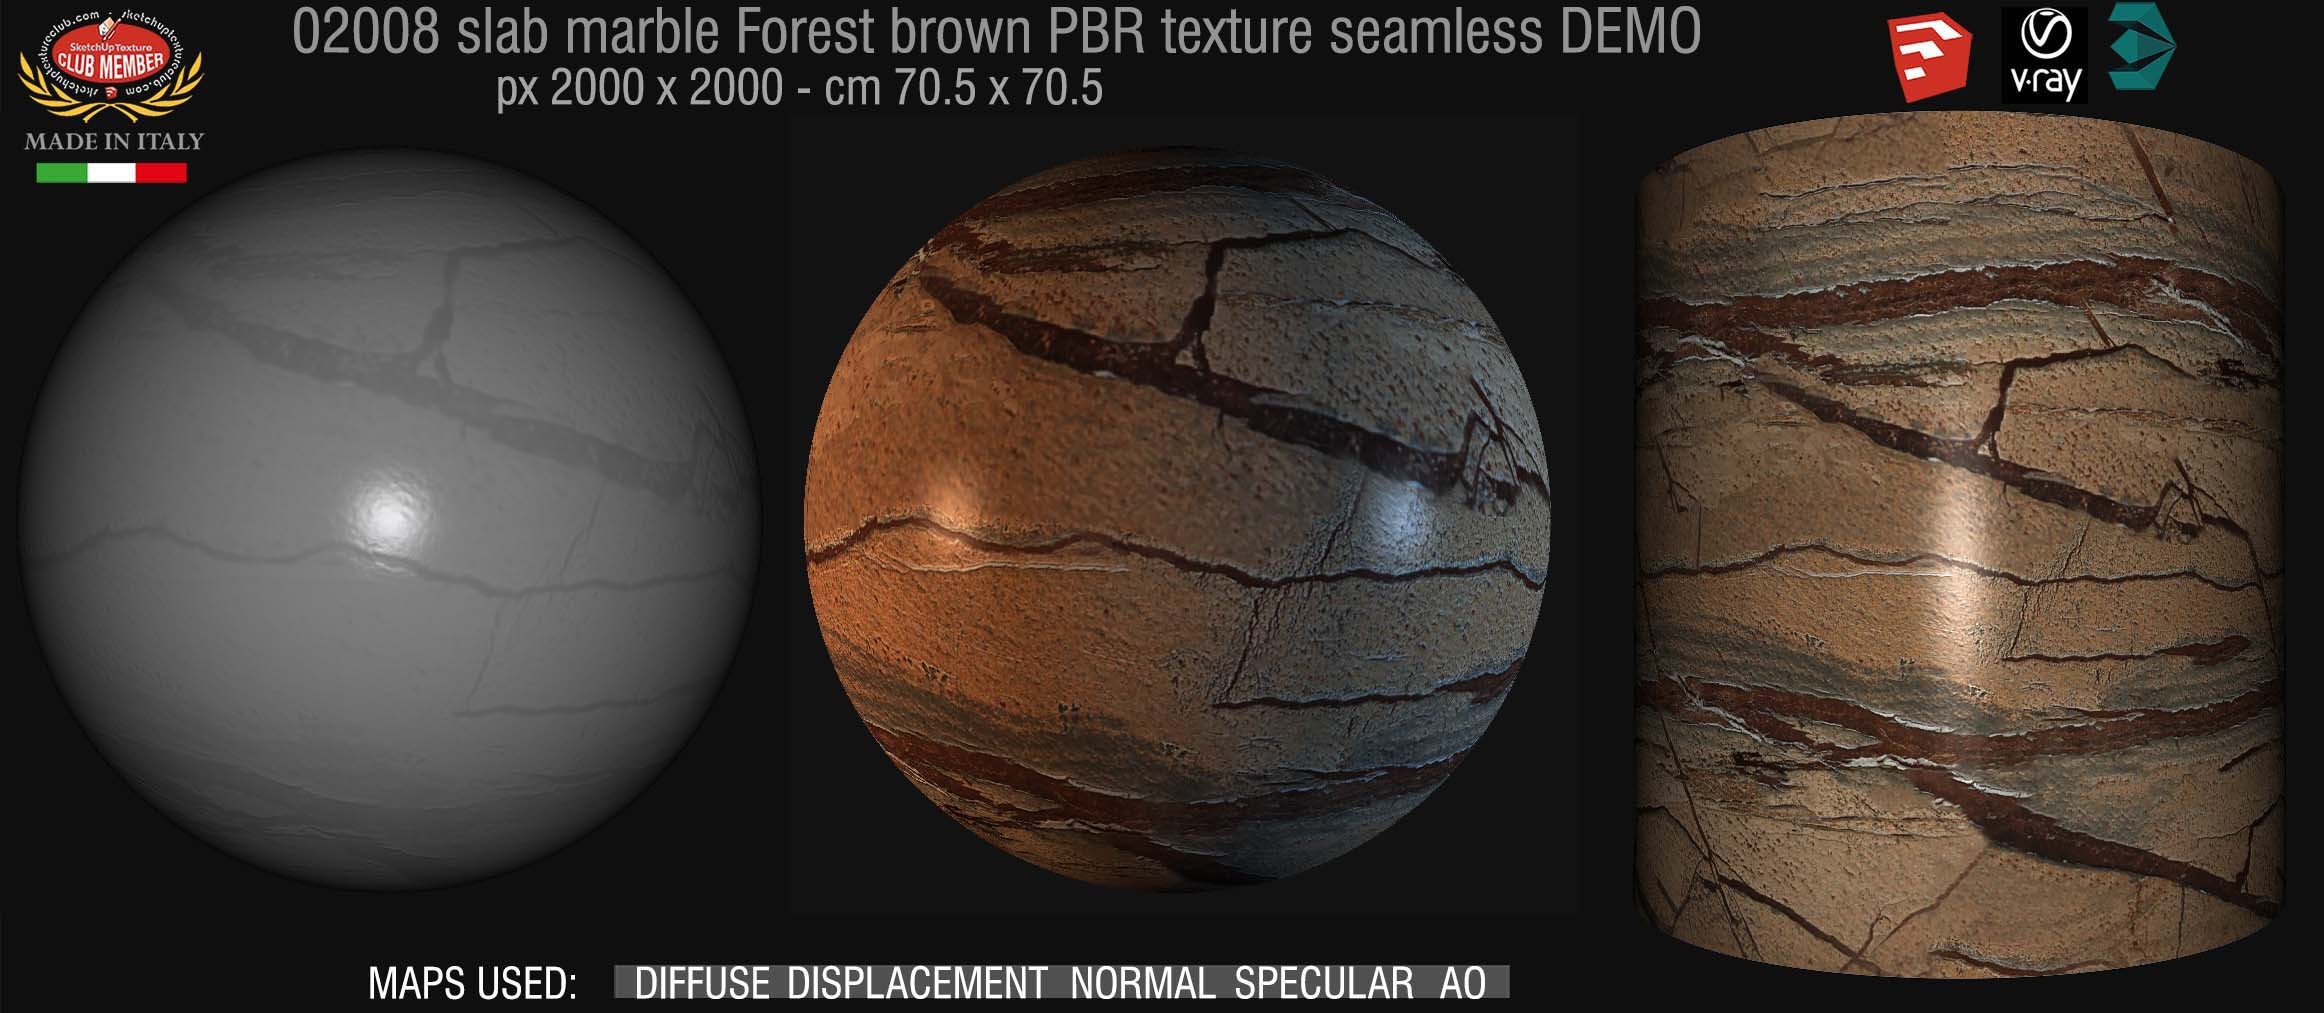 02008 slab marble forest brown PBR texture seamless DEMO